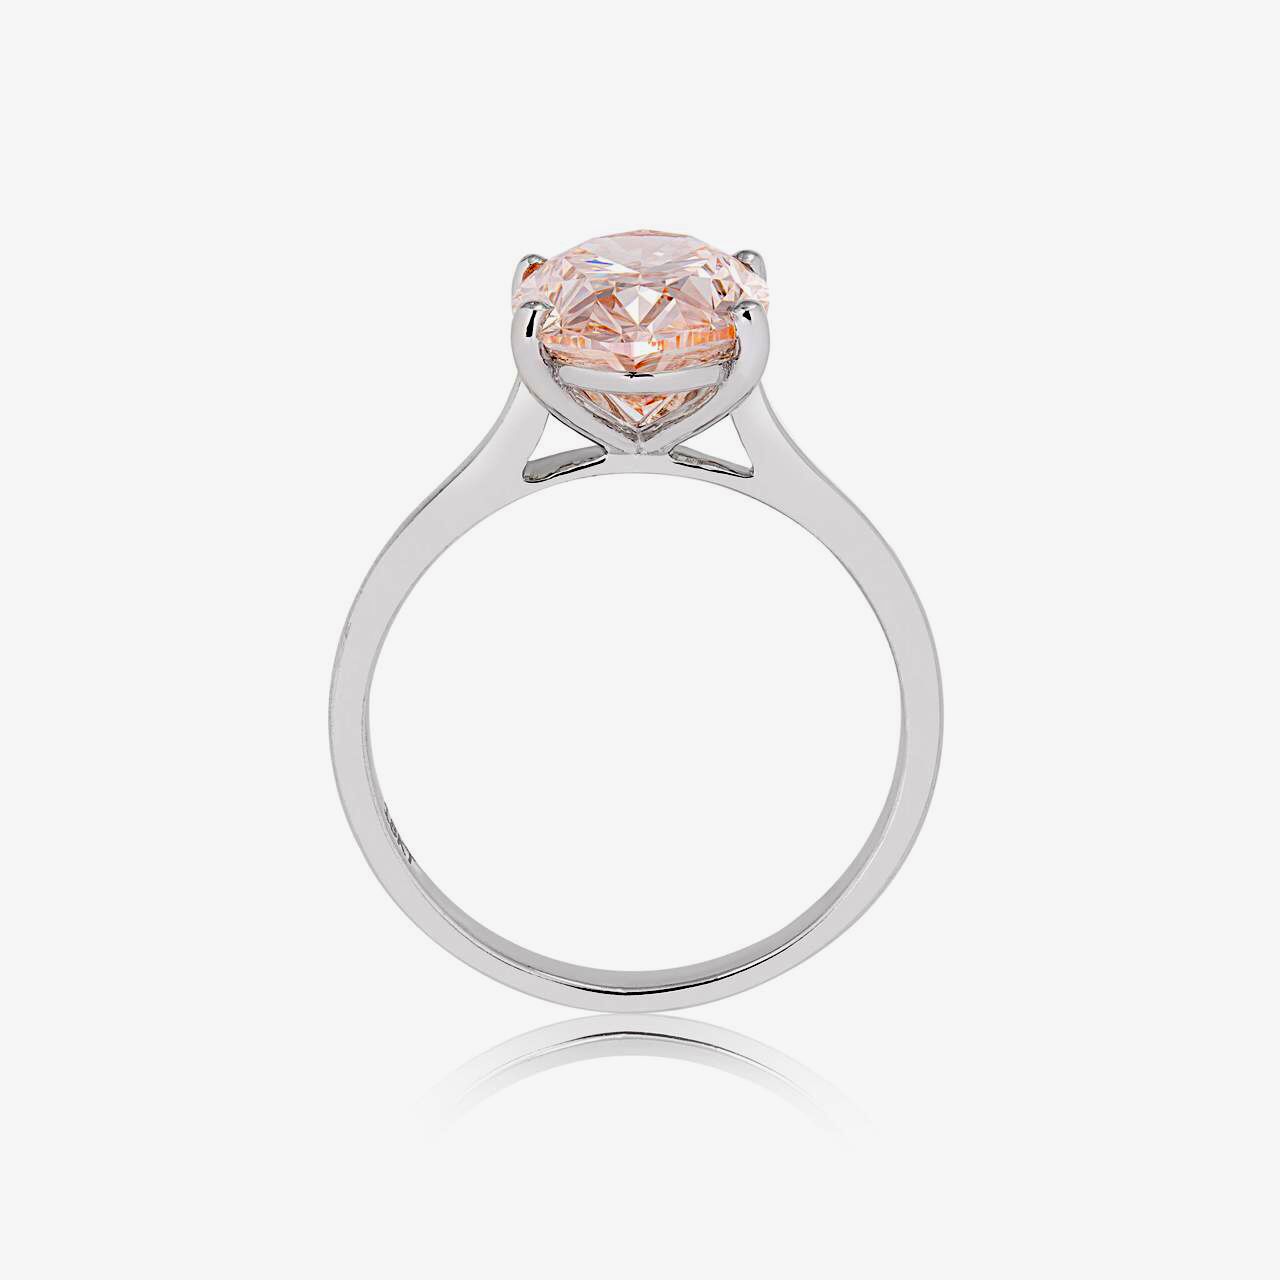 ** ON SALE ** Fancy Intense Pink Oval Cut 3.05CT Diamond Ring VS1 Clarity 18kt White Gold Ex Ex - Image 3 of 4